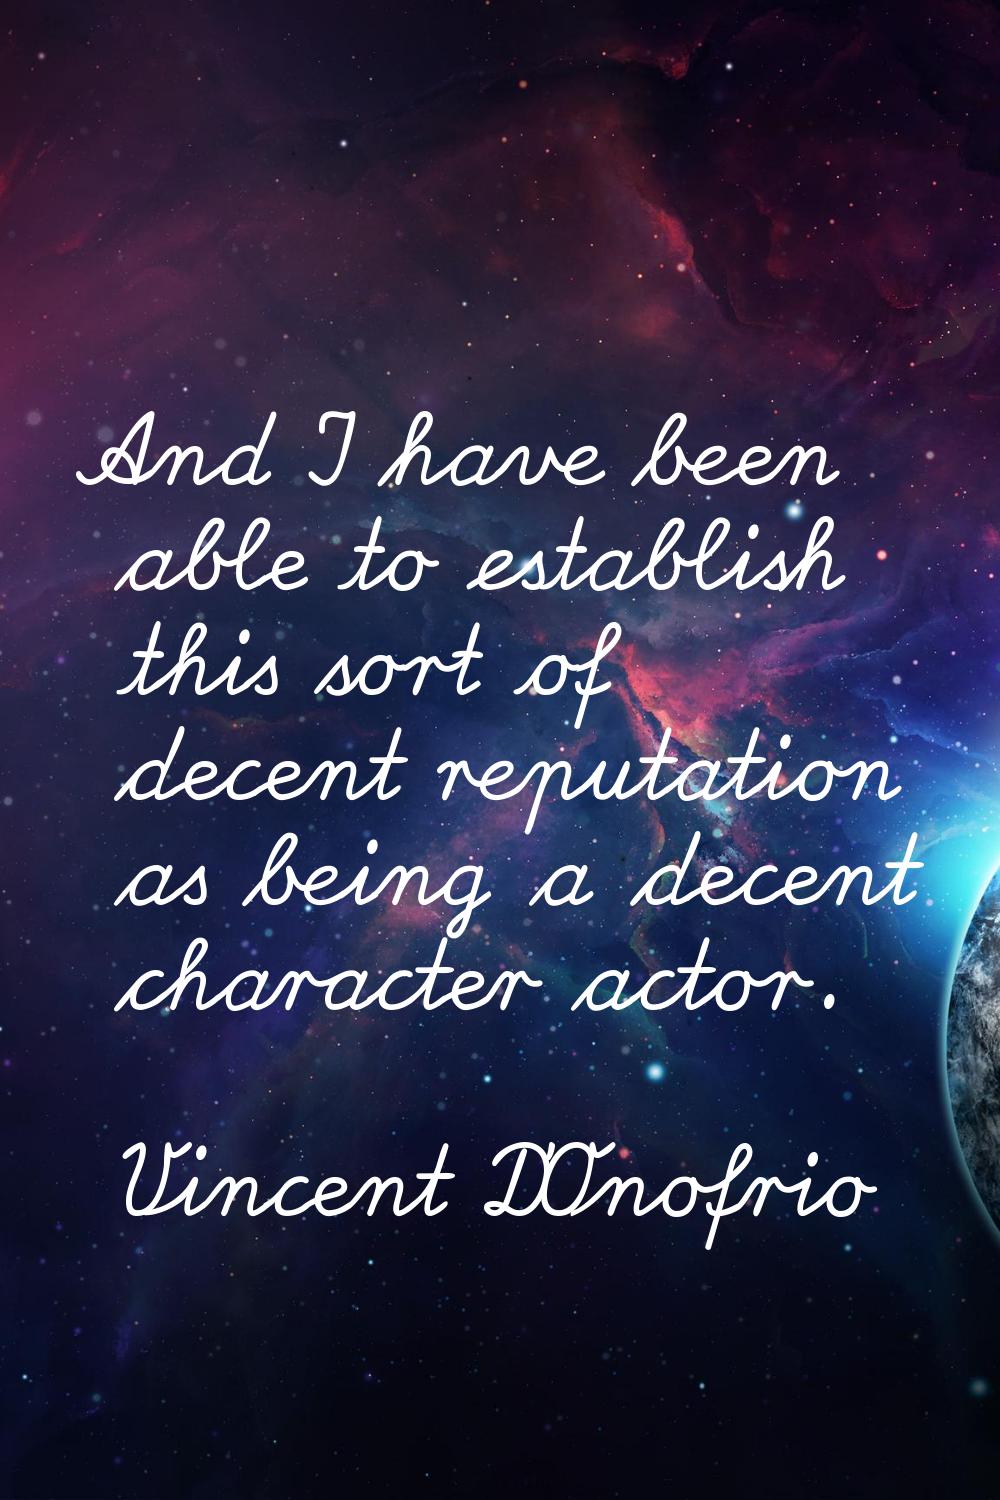 And I have been able to establish this sort of decent reputation as being a decent character actor.